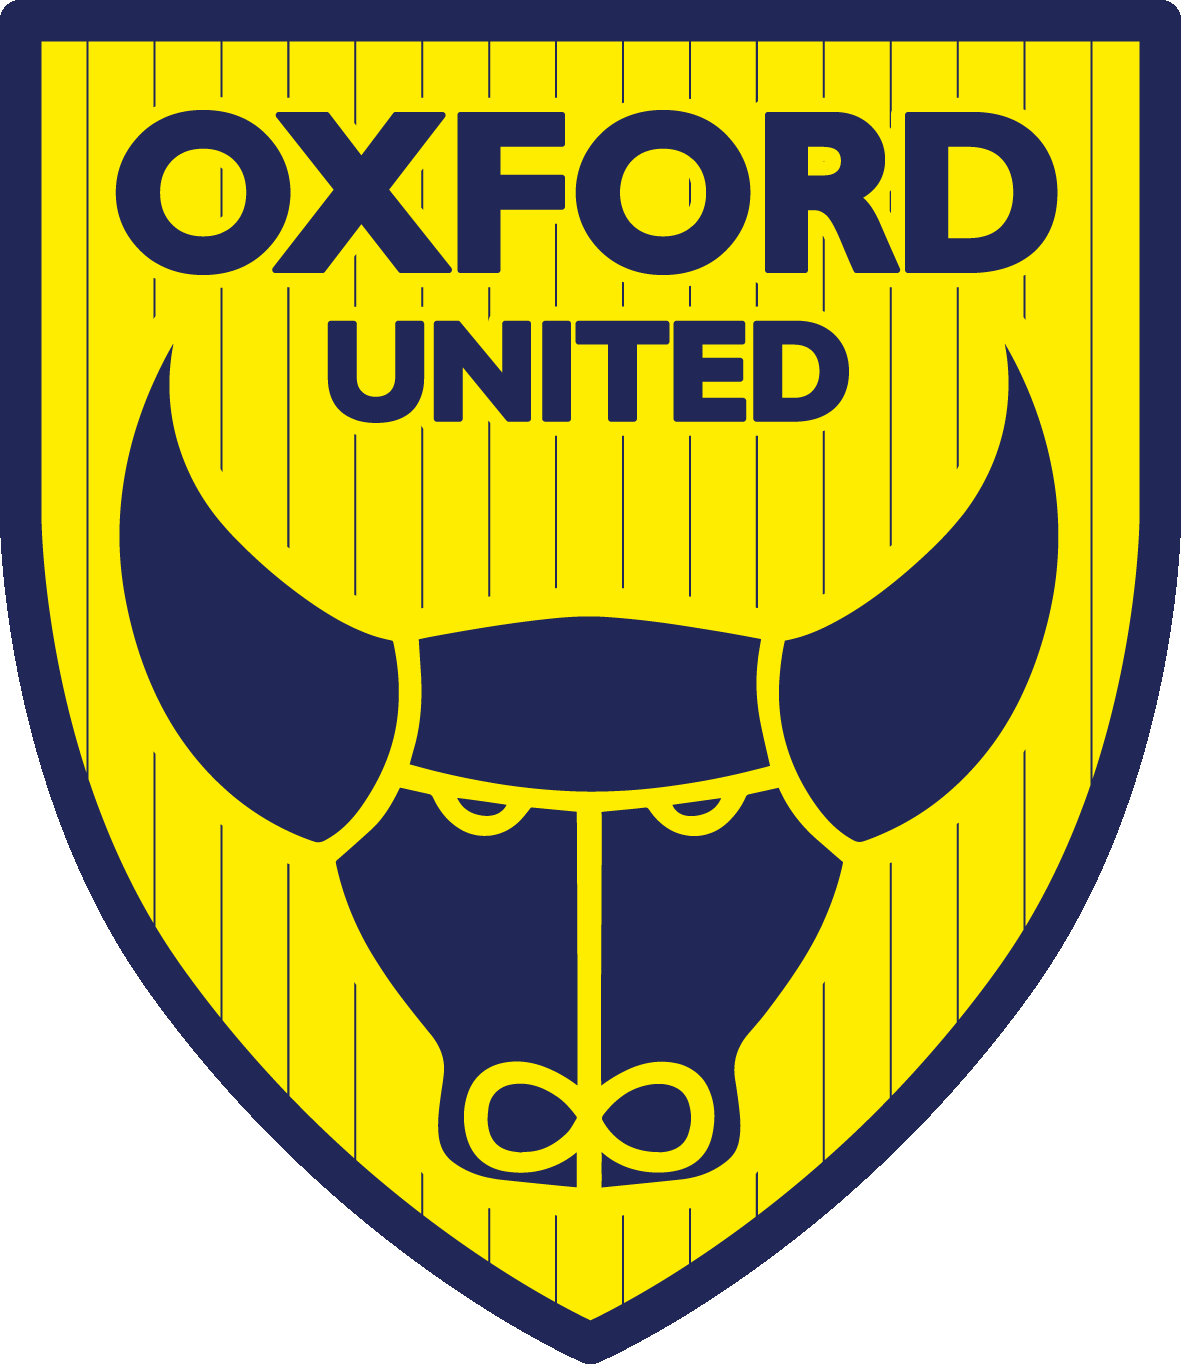 Yellow logo with motif of a bull head in a dark blue colour. With Oxford United in dark blue font above.